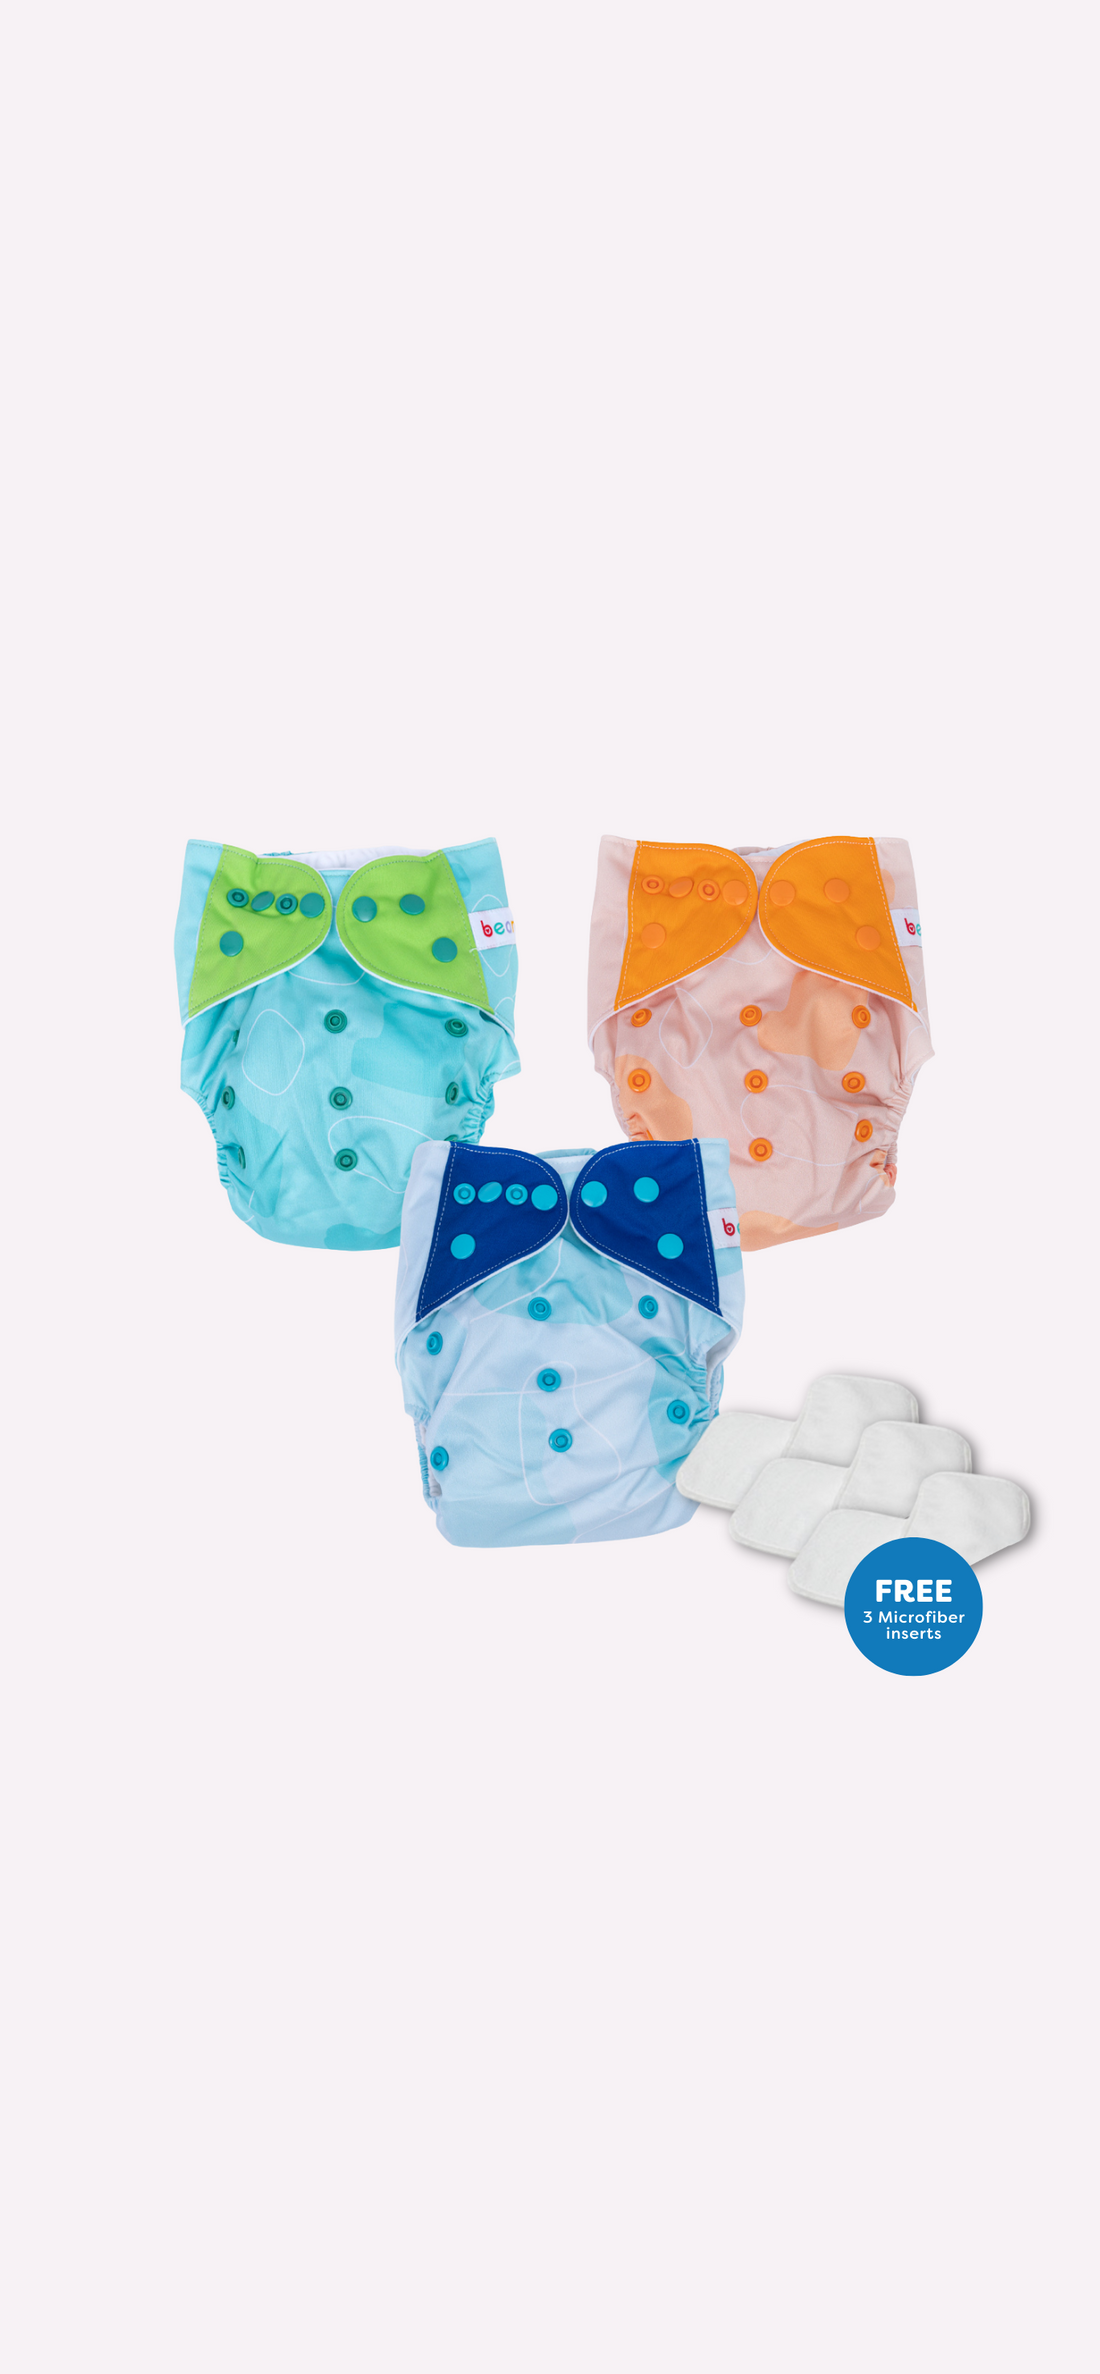 Snappies Little Bean Boys Cloth Diaper Set of 3